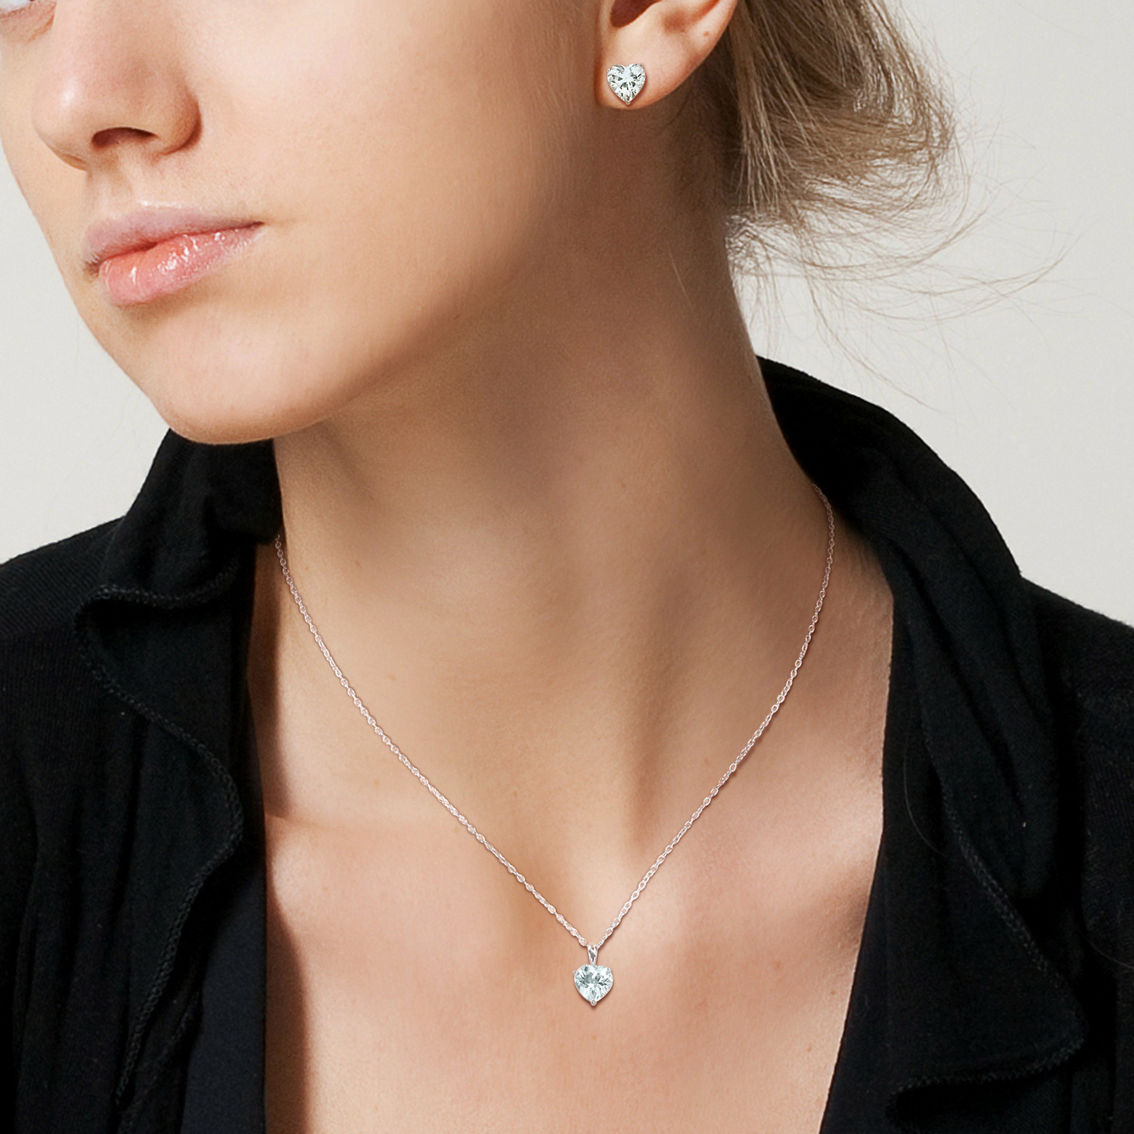 Sofia B. Sterling Silver Heart Aquamarine Solitaire Necklace and Earrings 2 pc. Set - Image 3 of 4